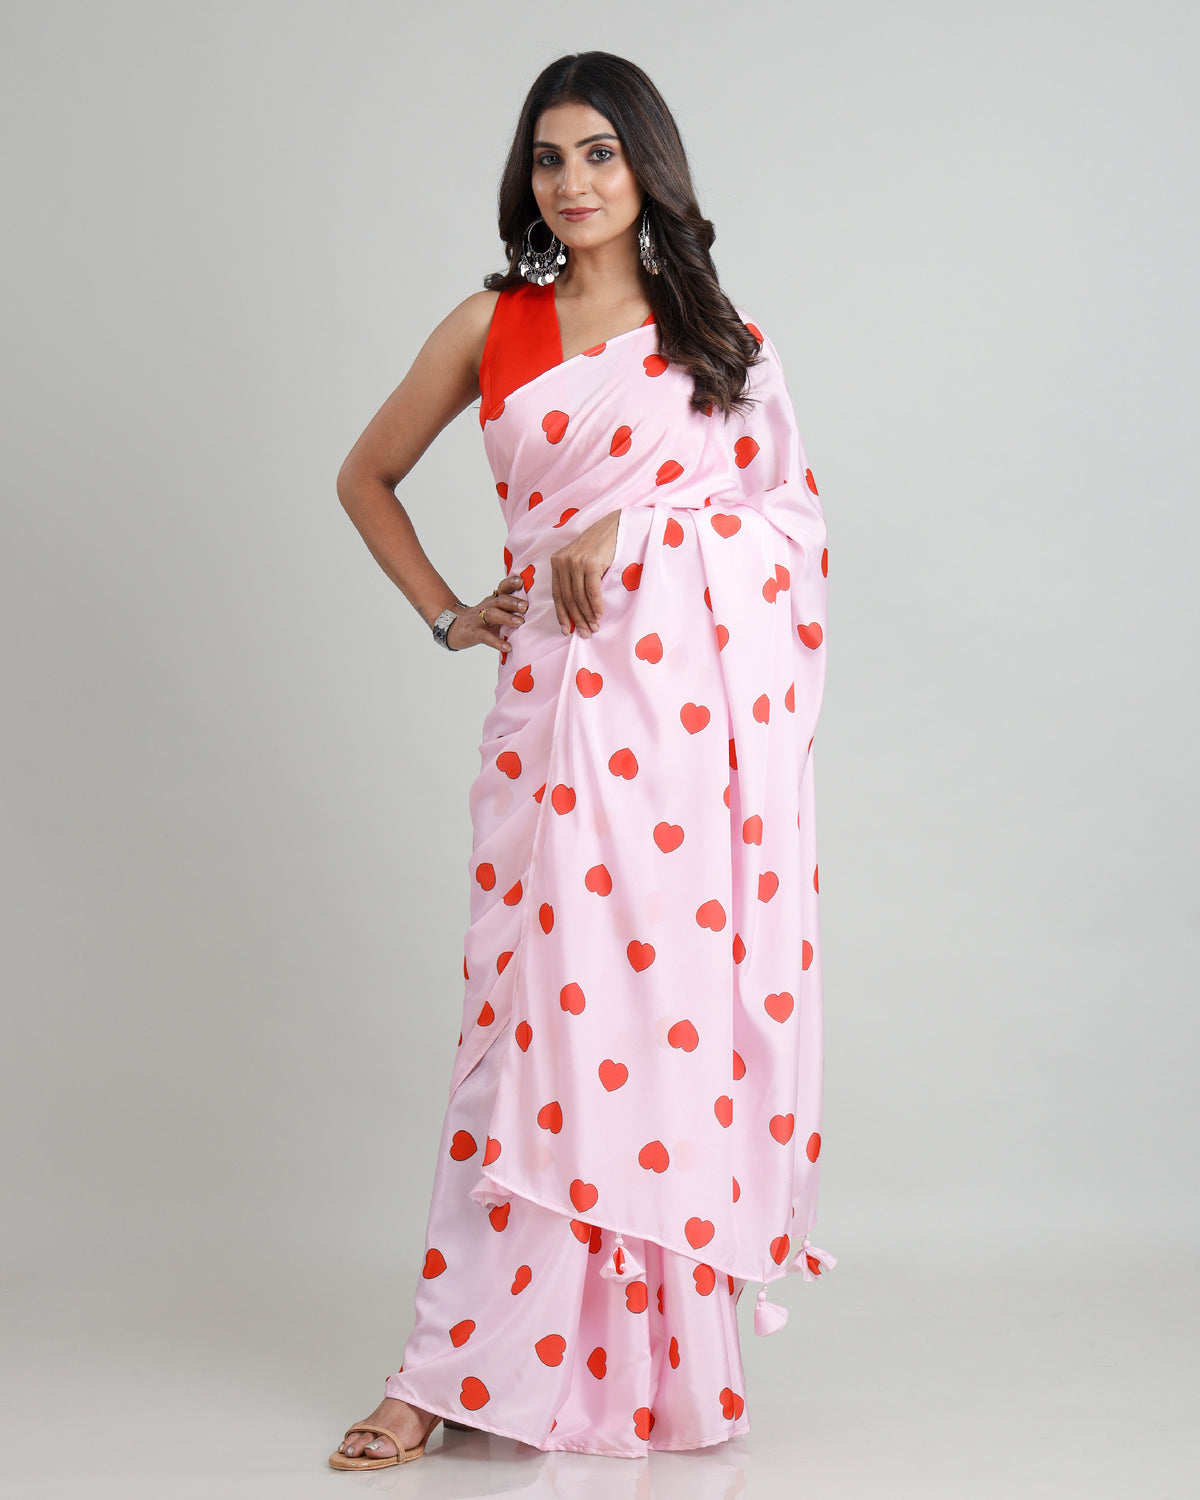 Blushing Hearts: Pink Silk Saree With Touch of Romance